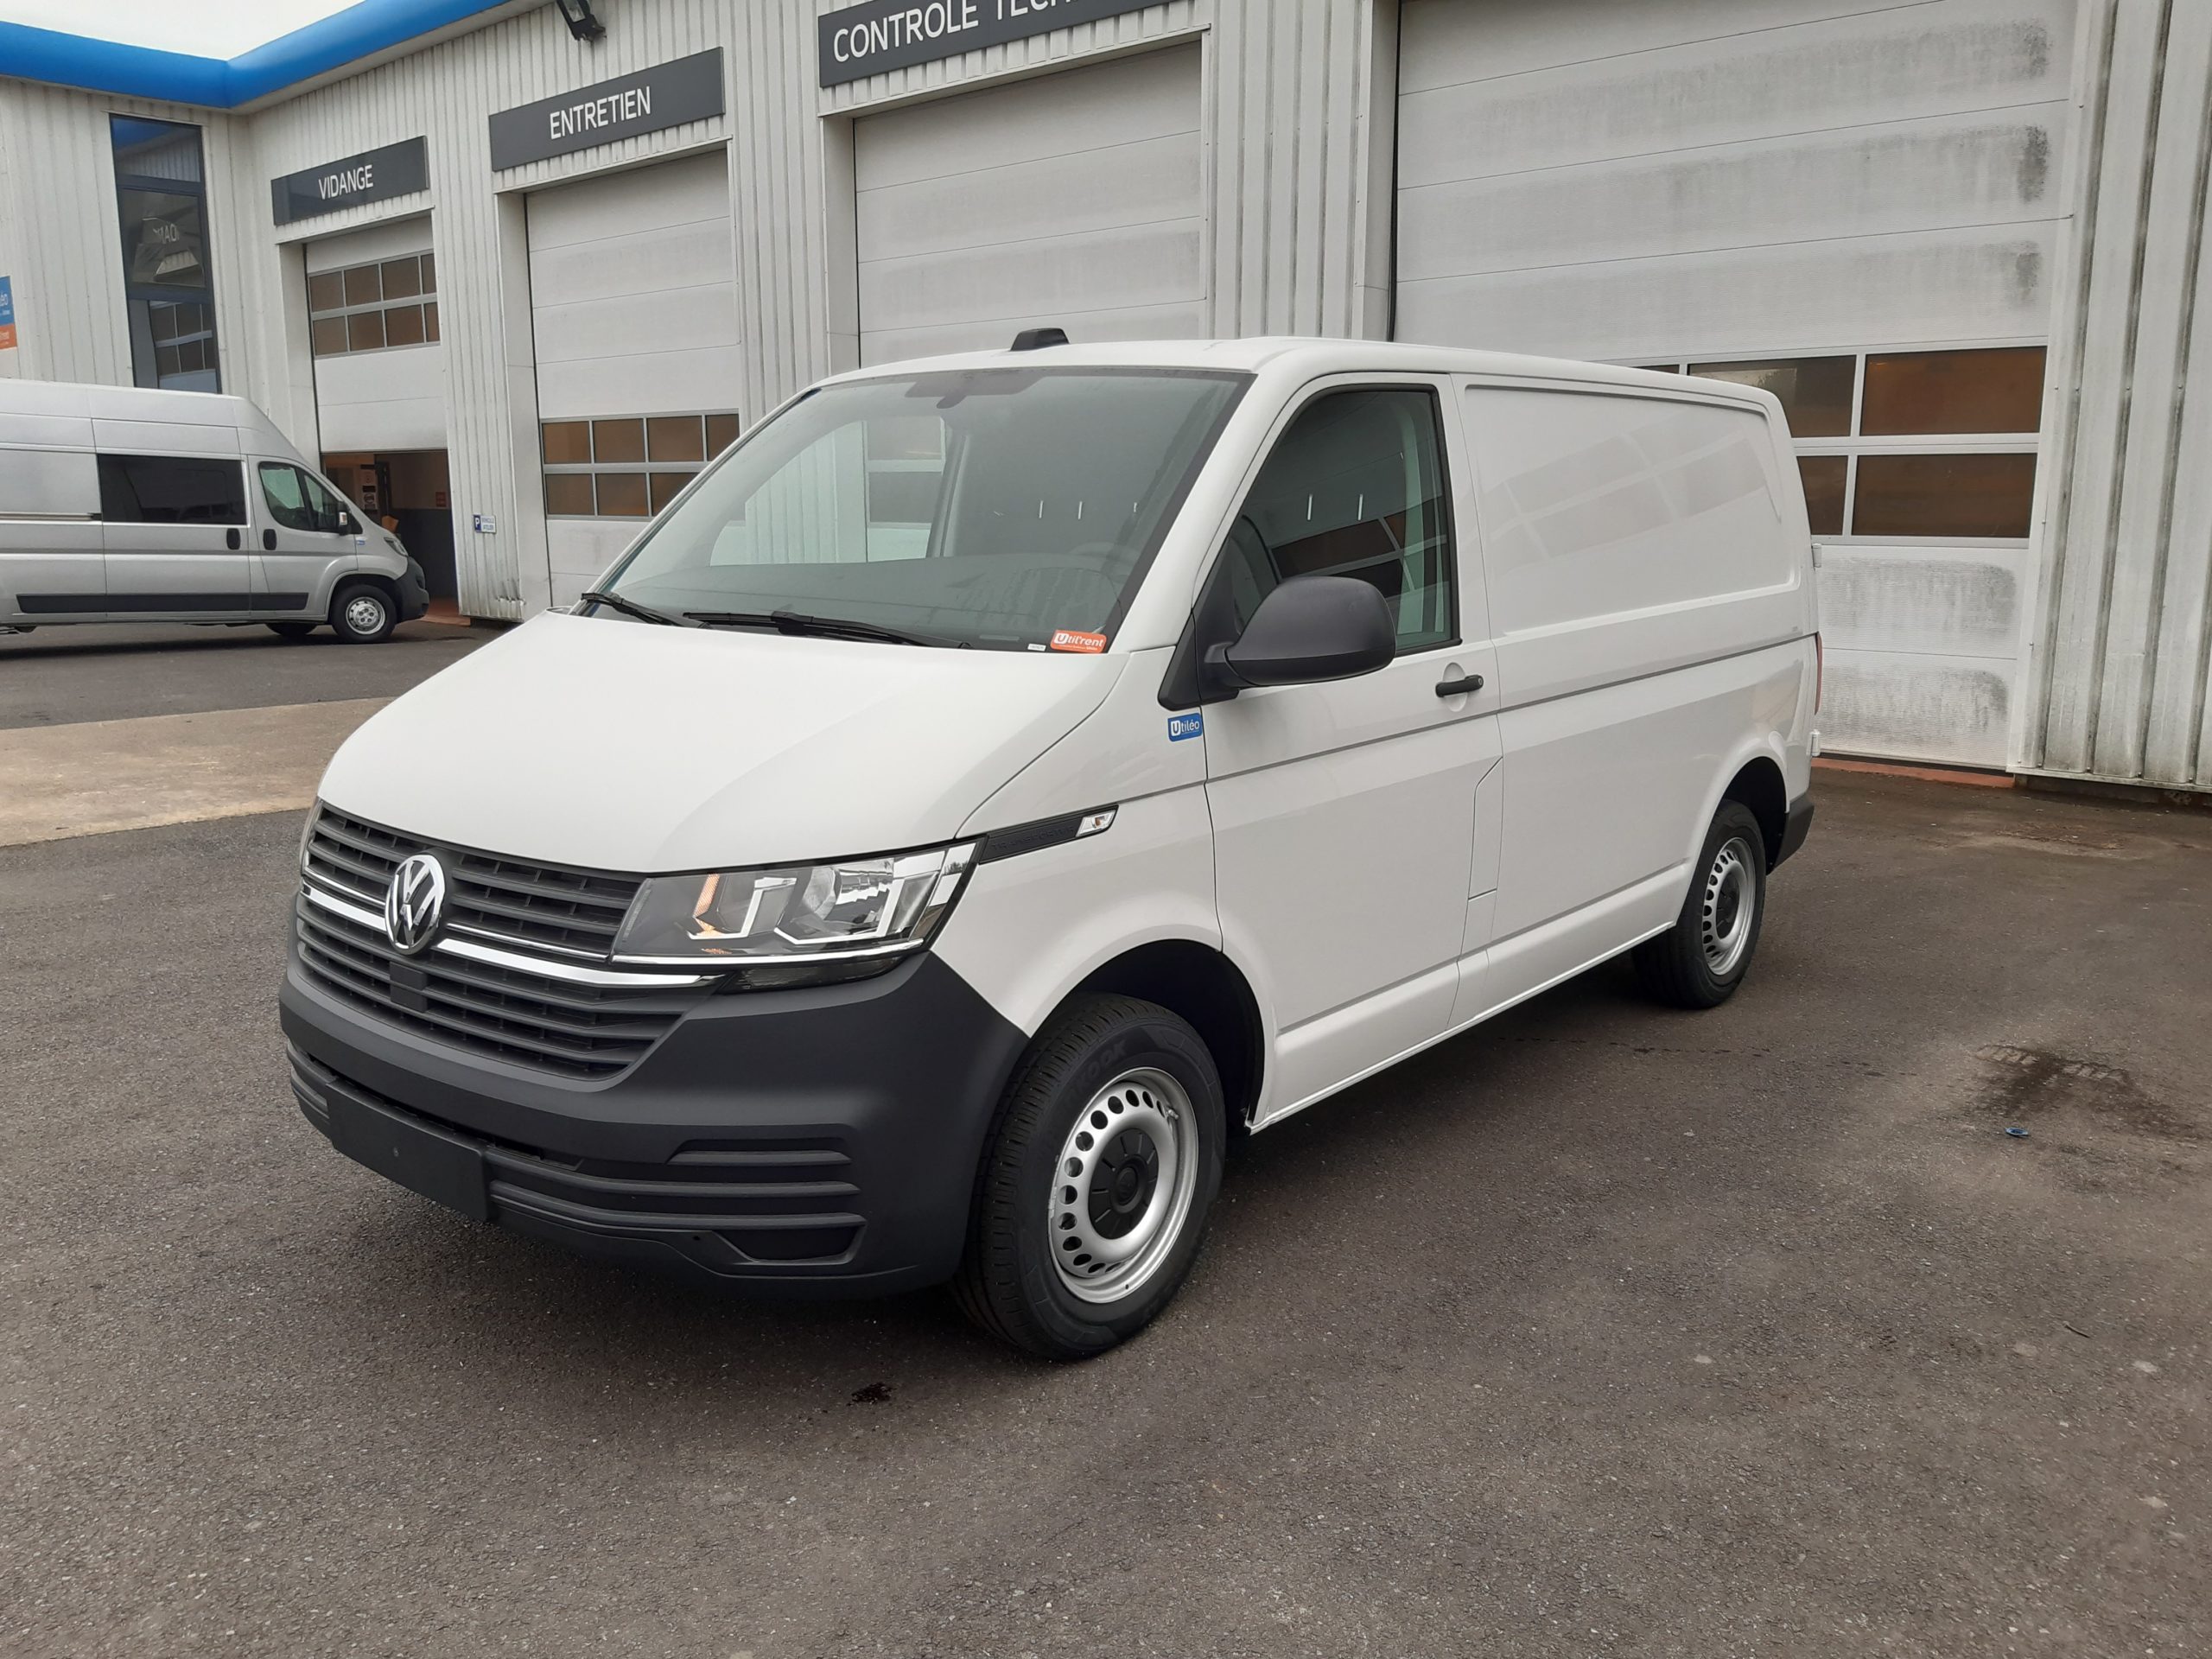 https://www.utilrent.fr/wp-content/uploads/2021/07/Location-dun-fourgon-compact-double-cabine-Volkswagen-Transporter-T6-1-Vue2-scaled.jpg